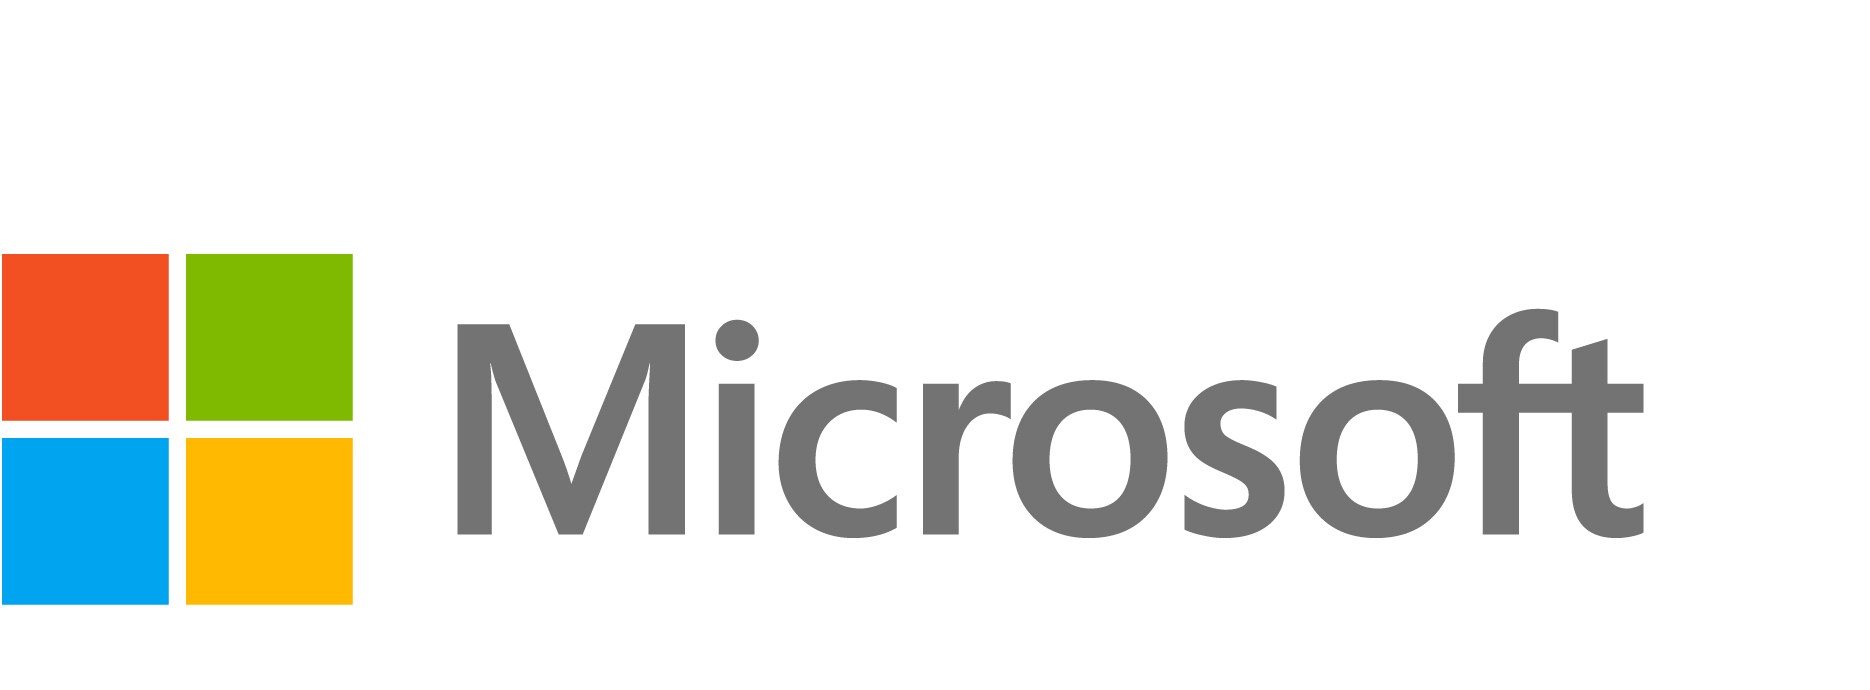 Microsoft System Center Configuration Manager - software assurance - 1 operating system environment (OSE)